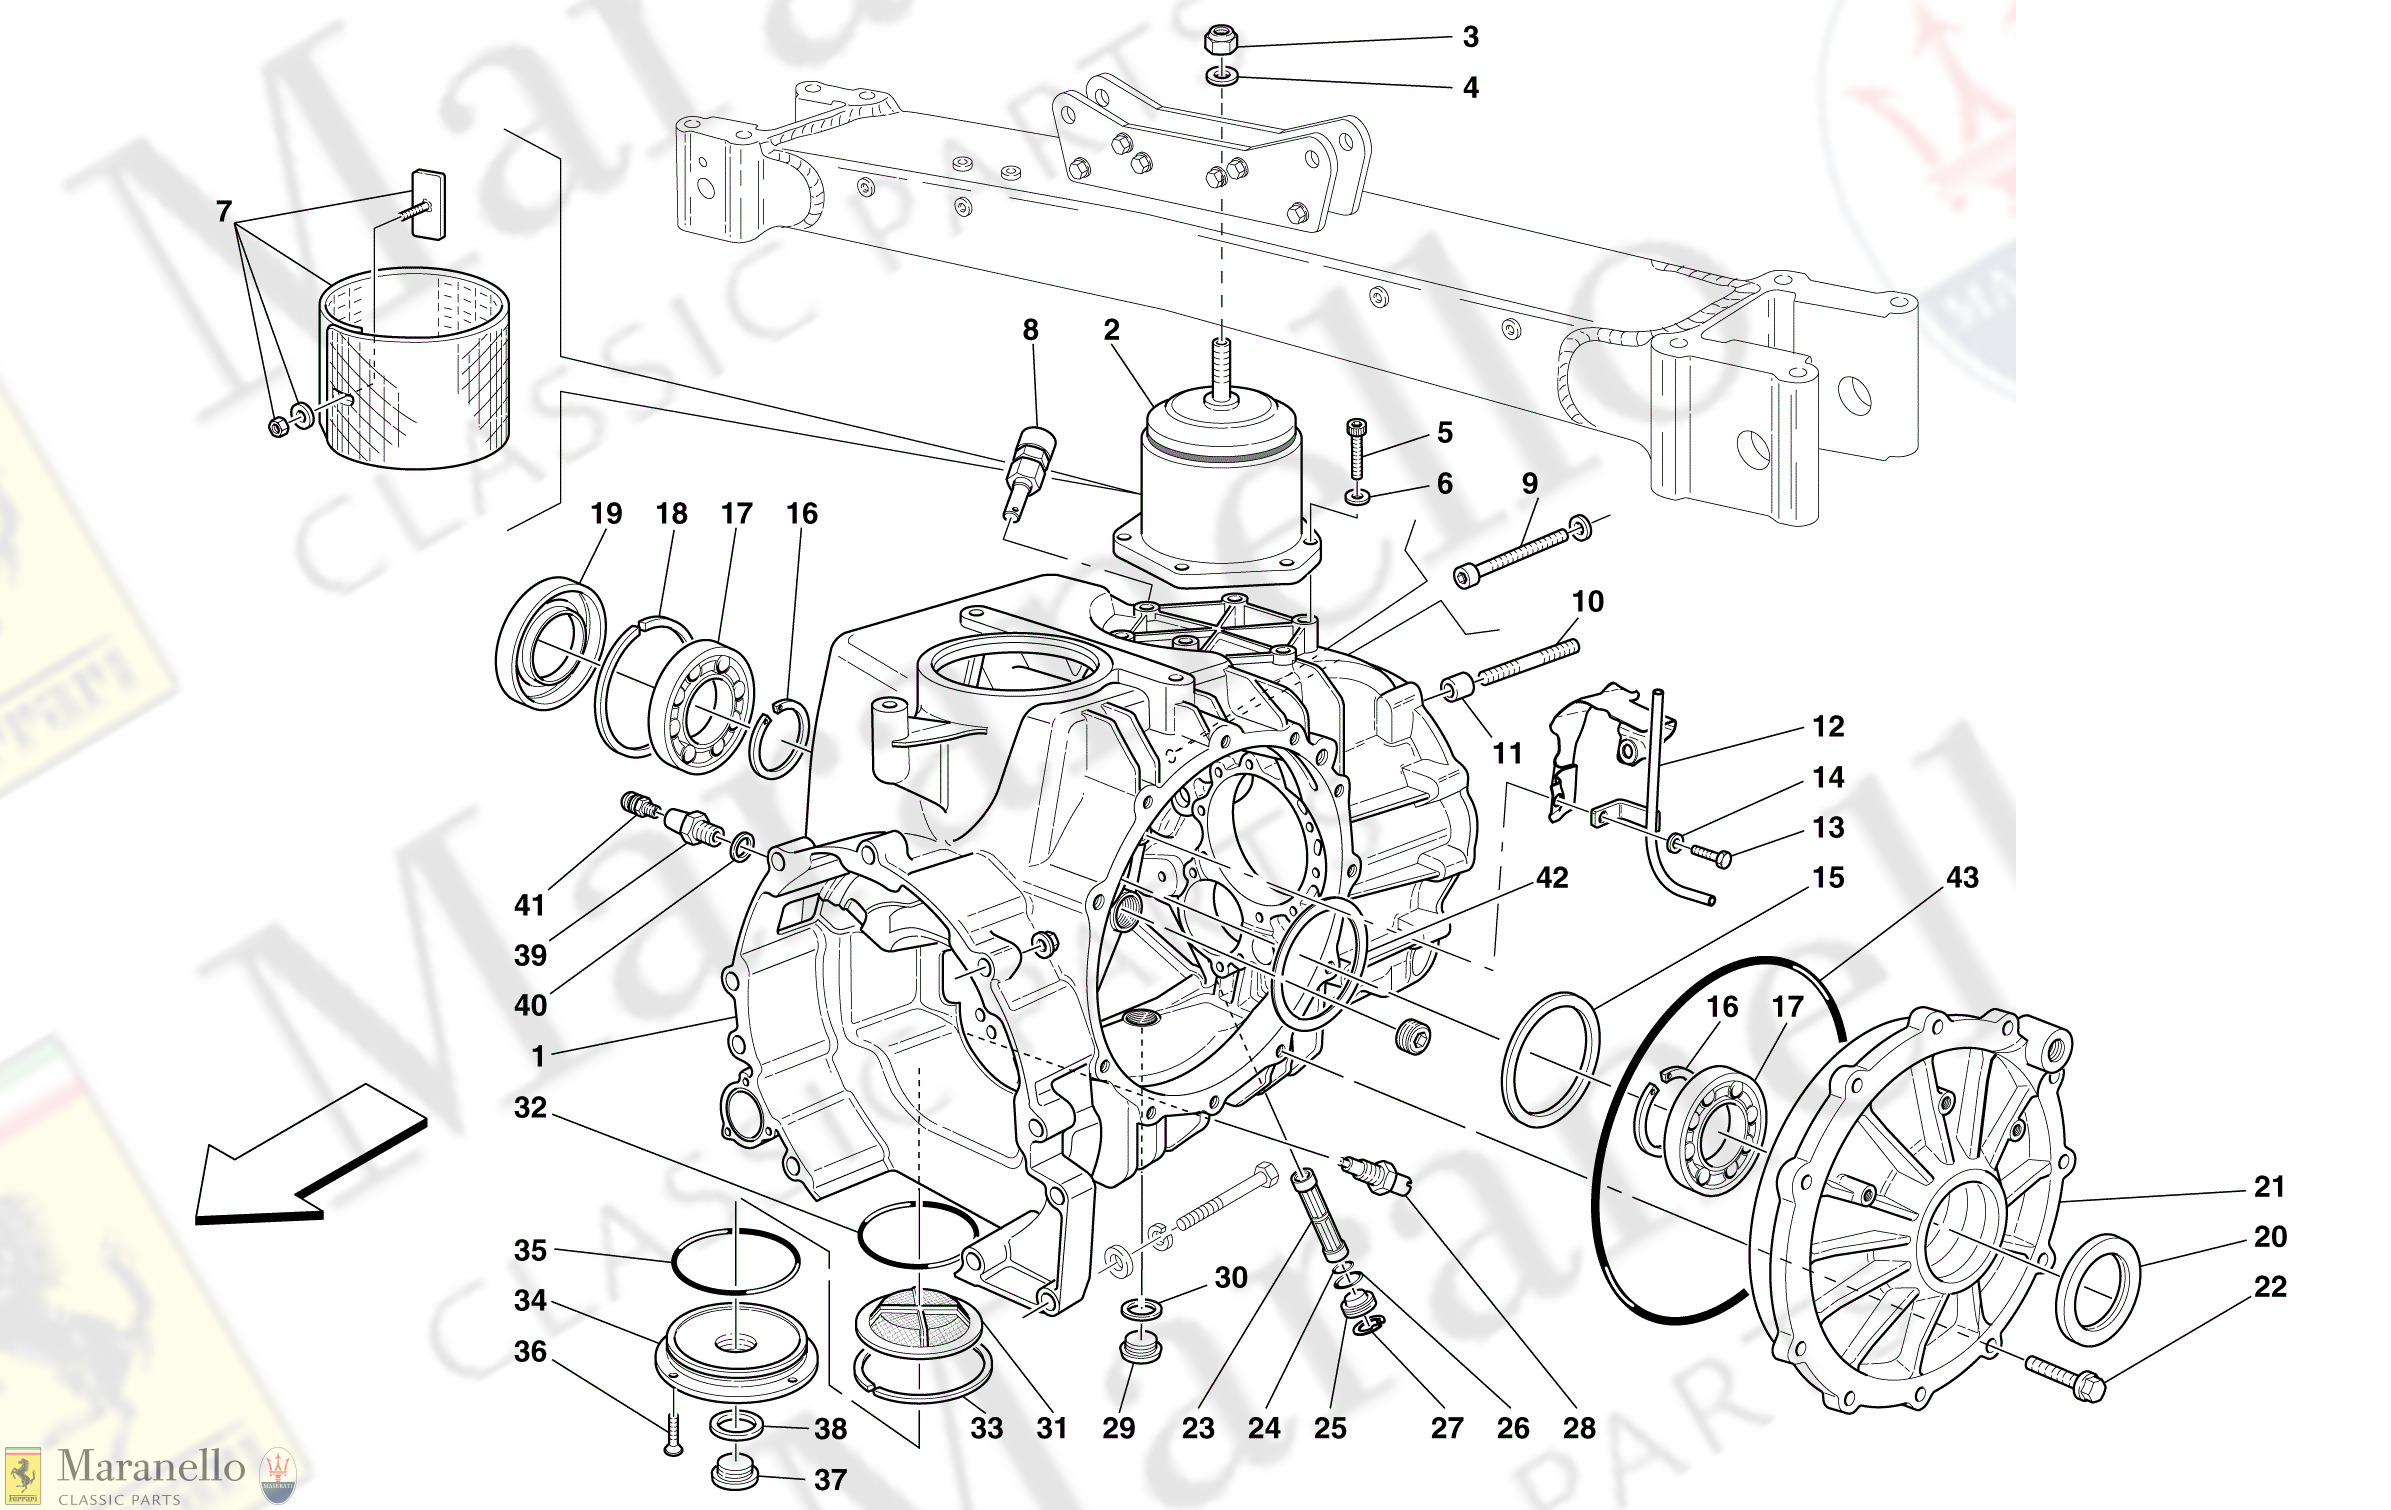 C 25 - Gearbox / Differential Housing